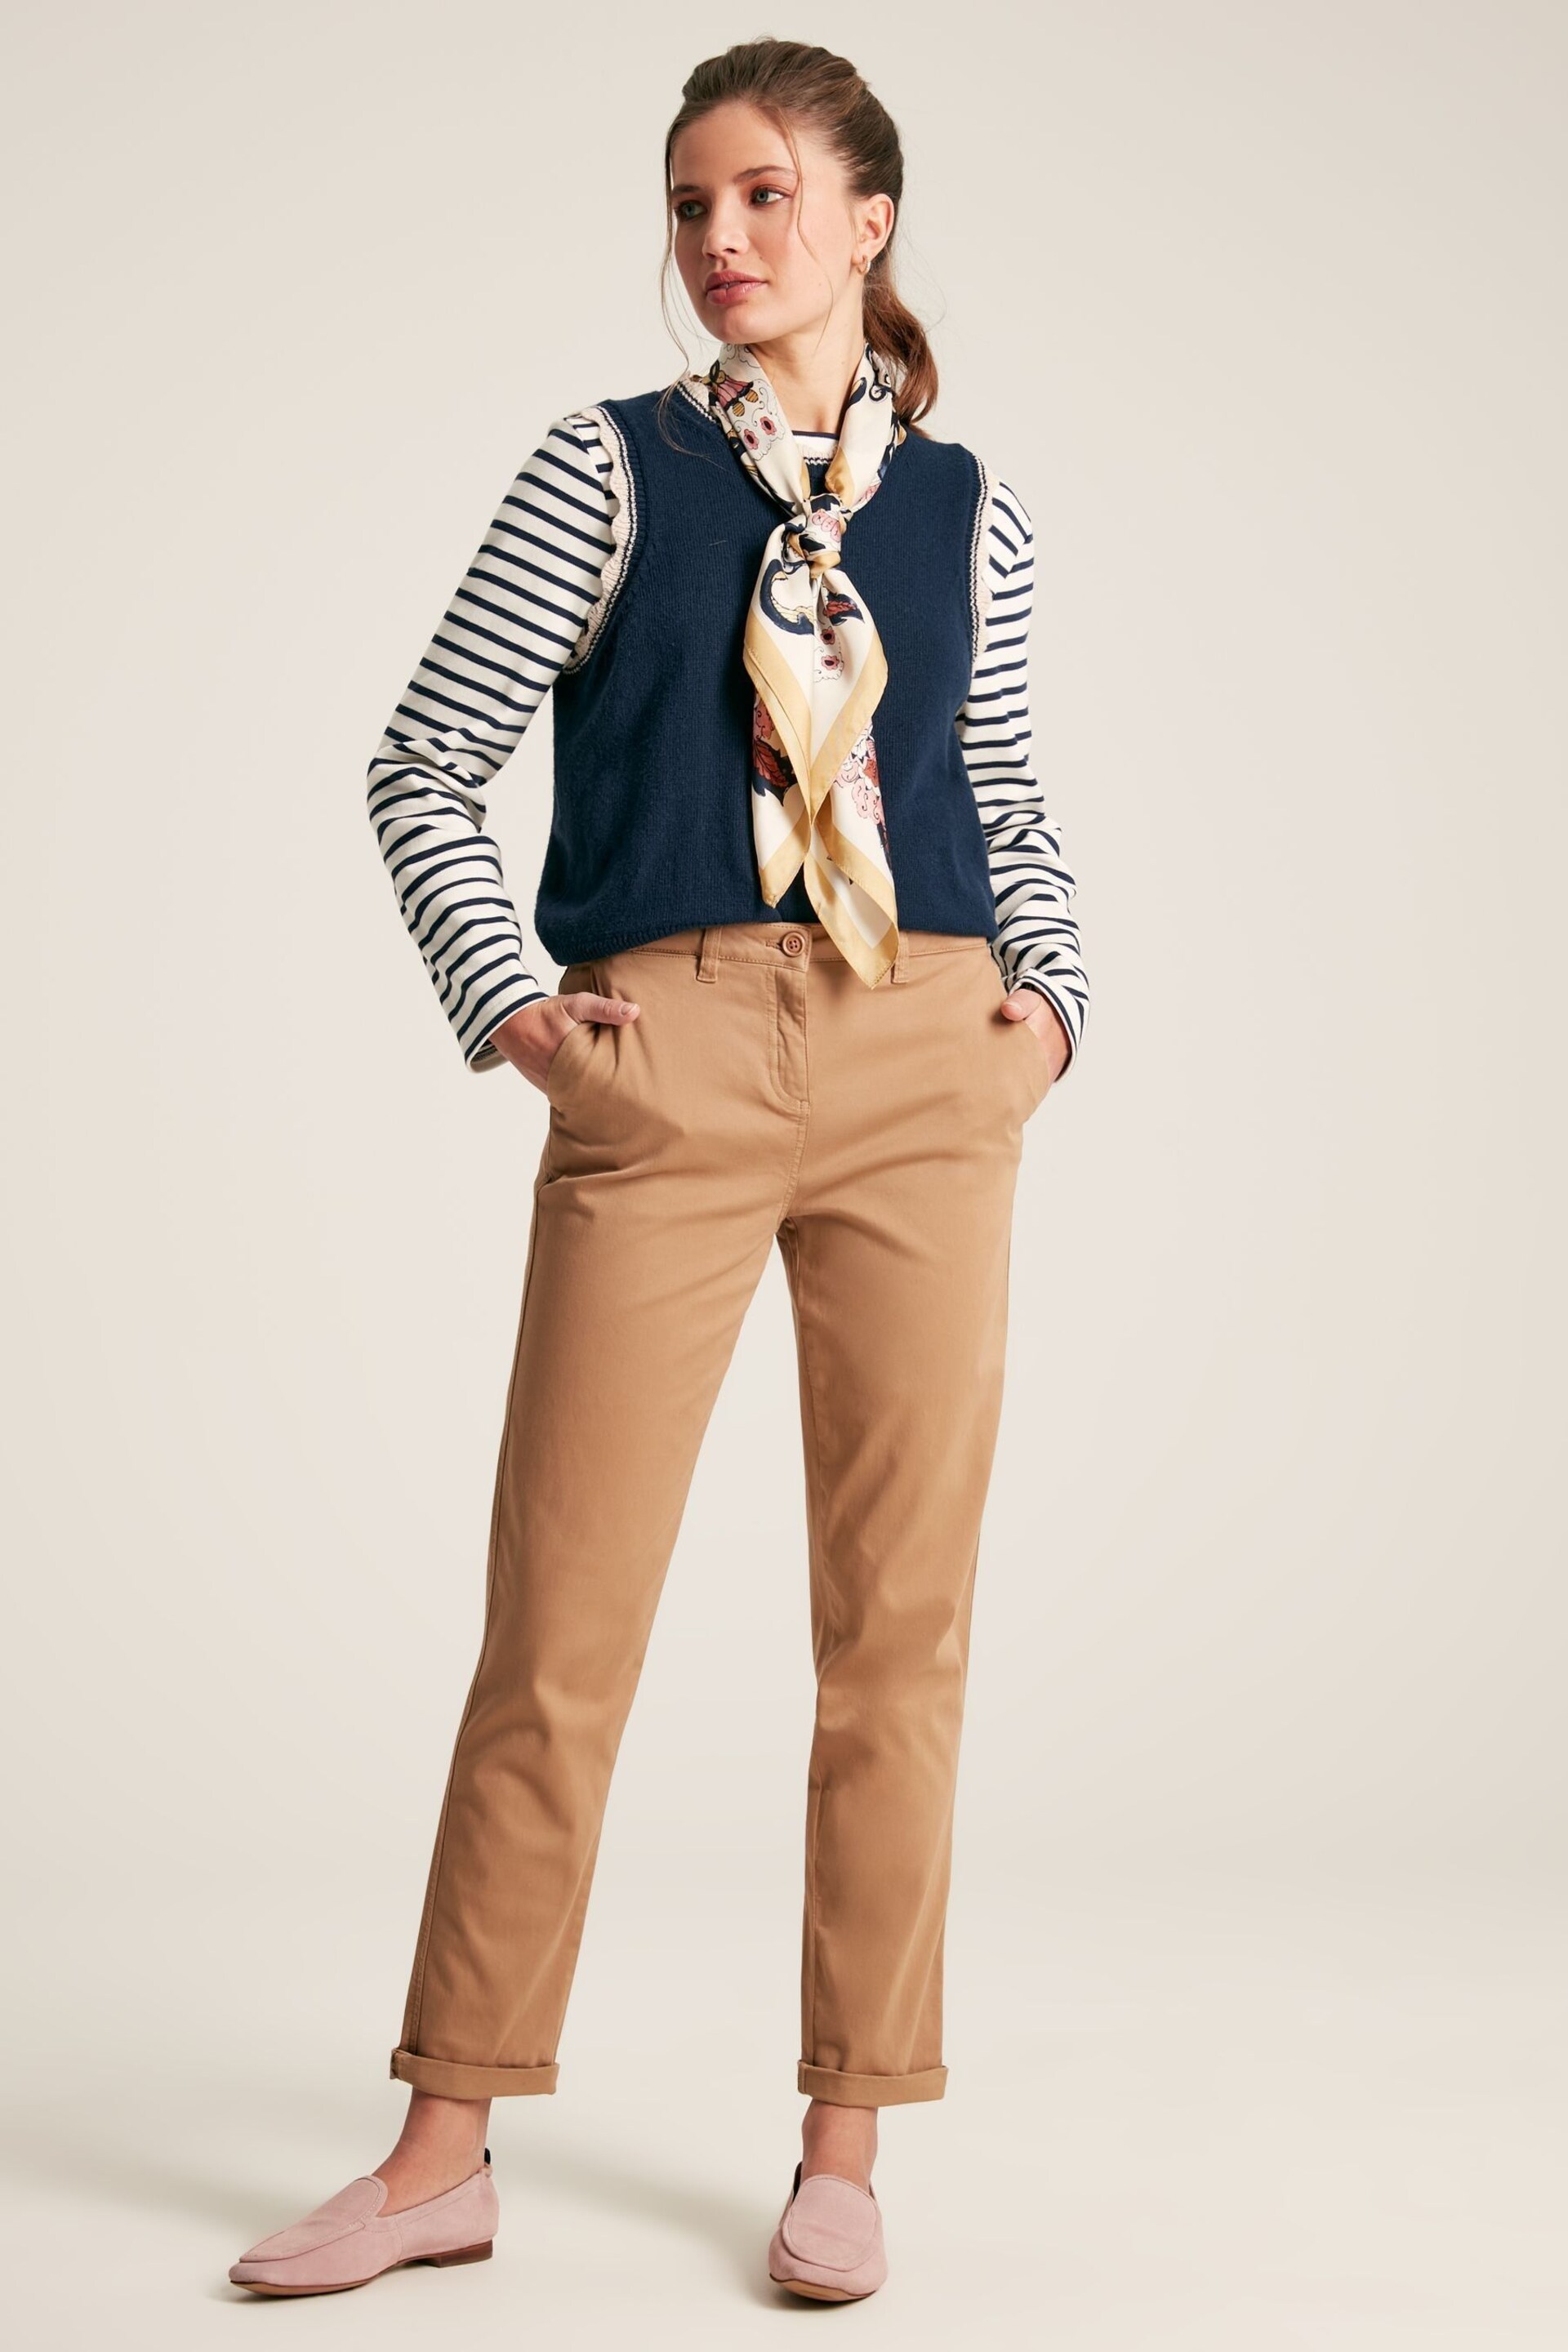 Joules Hesford Stone Chino Trousers - Image 2 of 7